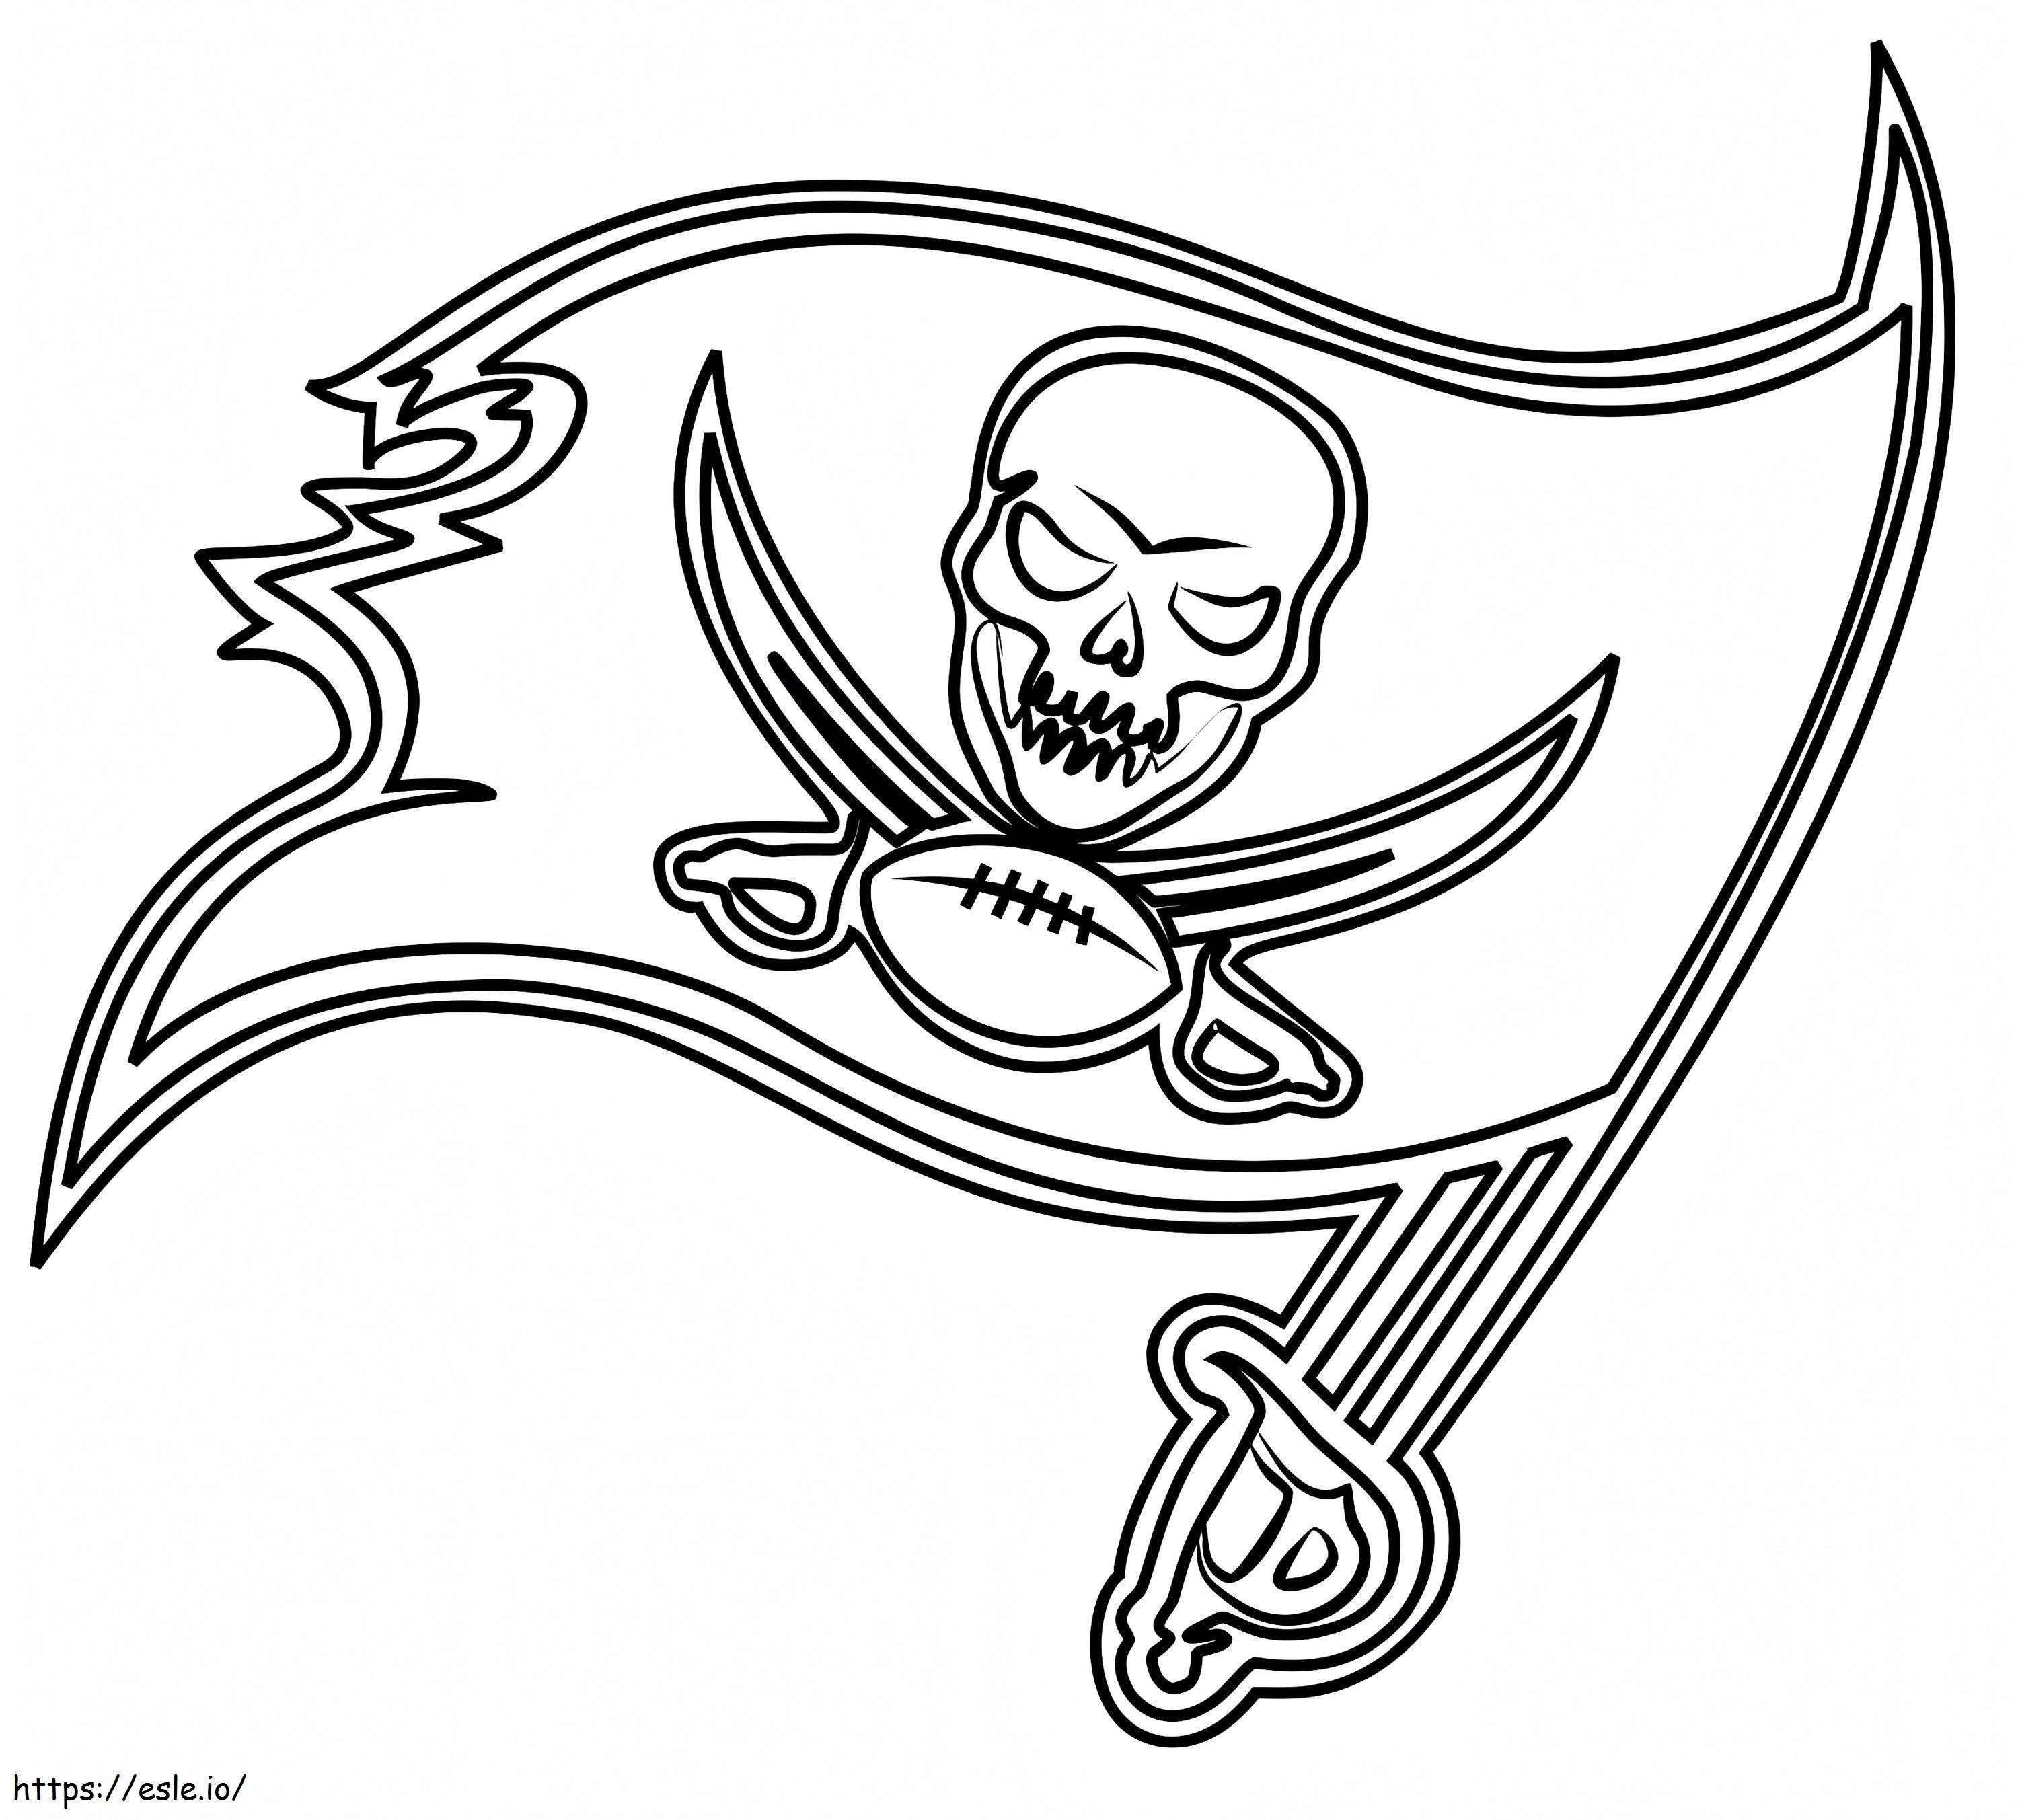 Logo Tampa Bay Buccaneers coloring page